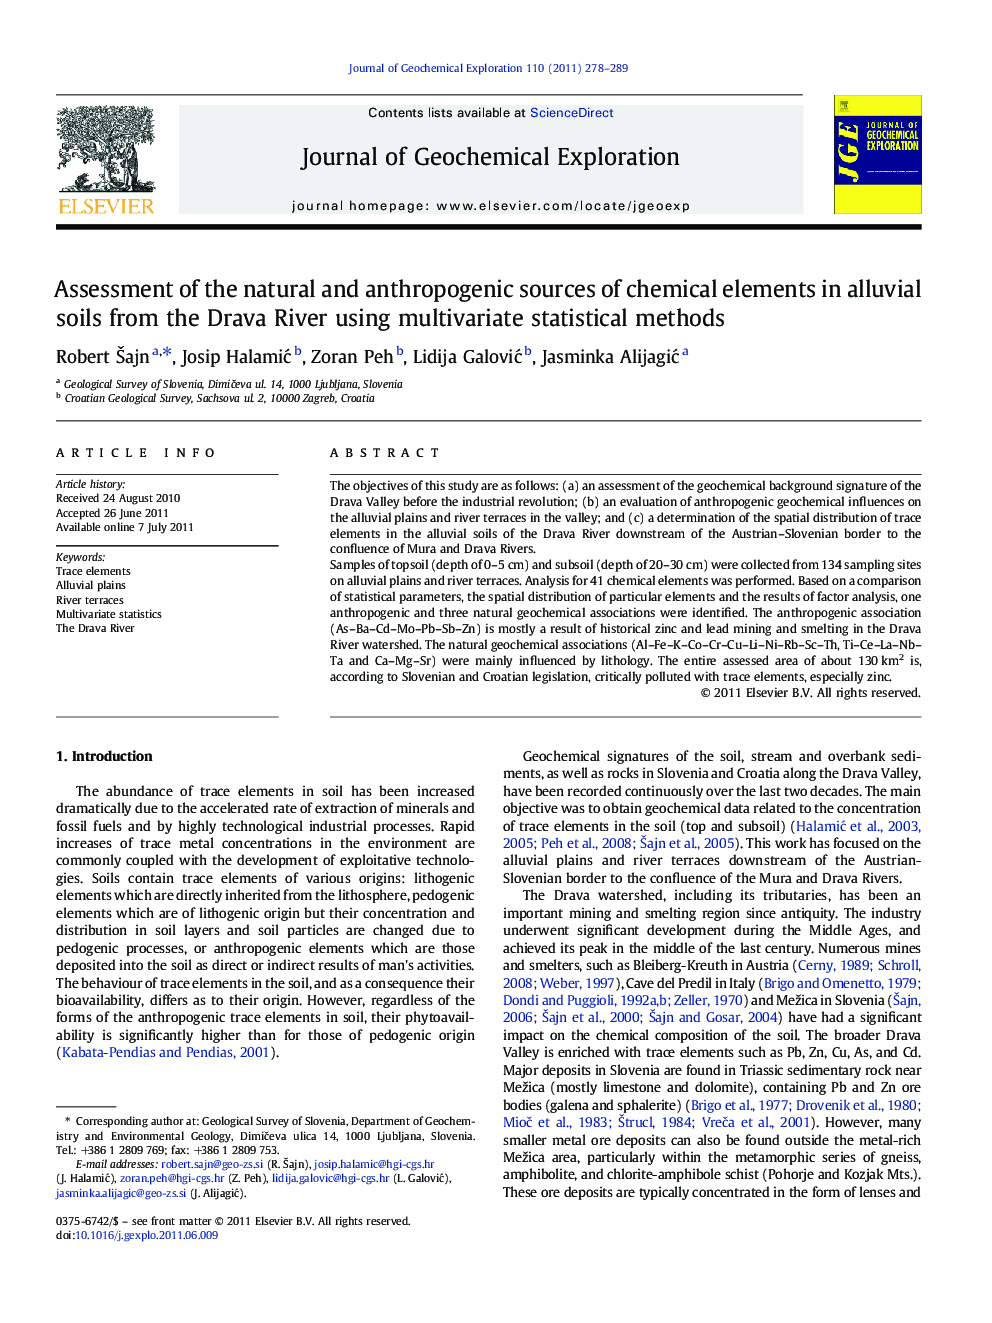 Assessment of the natural and anthropogenic sources of chemical elements in alluvial soils from the Drava River using multivariate statistical methods